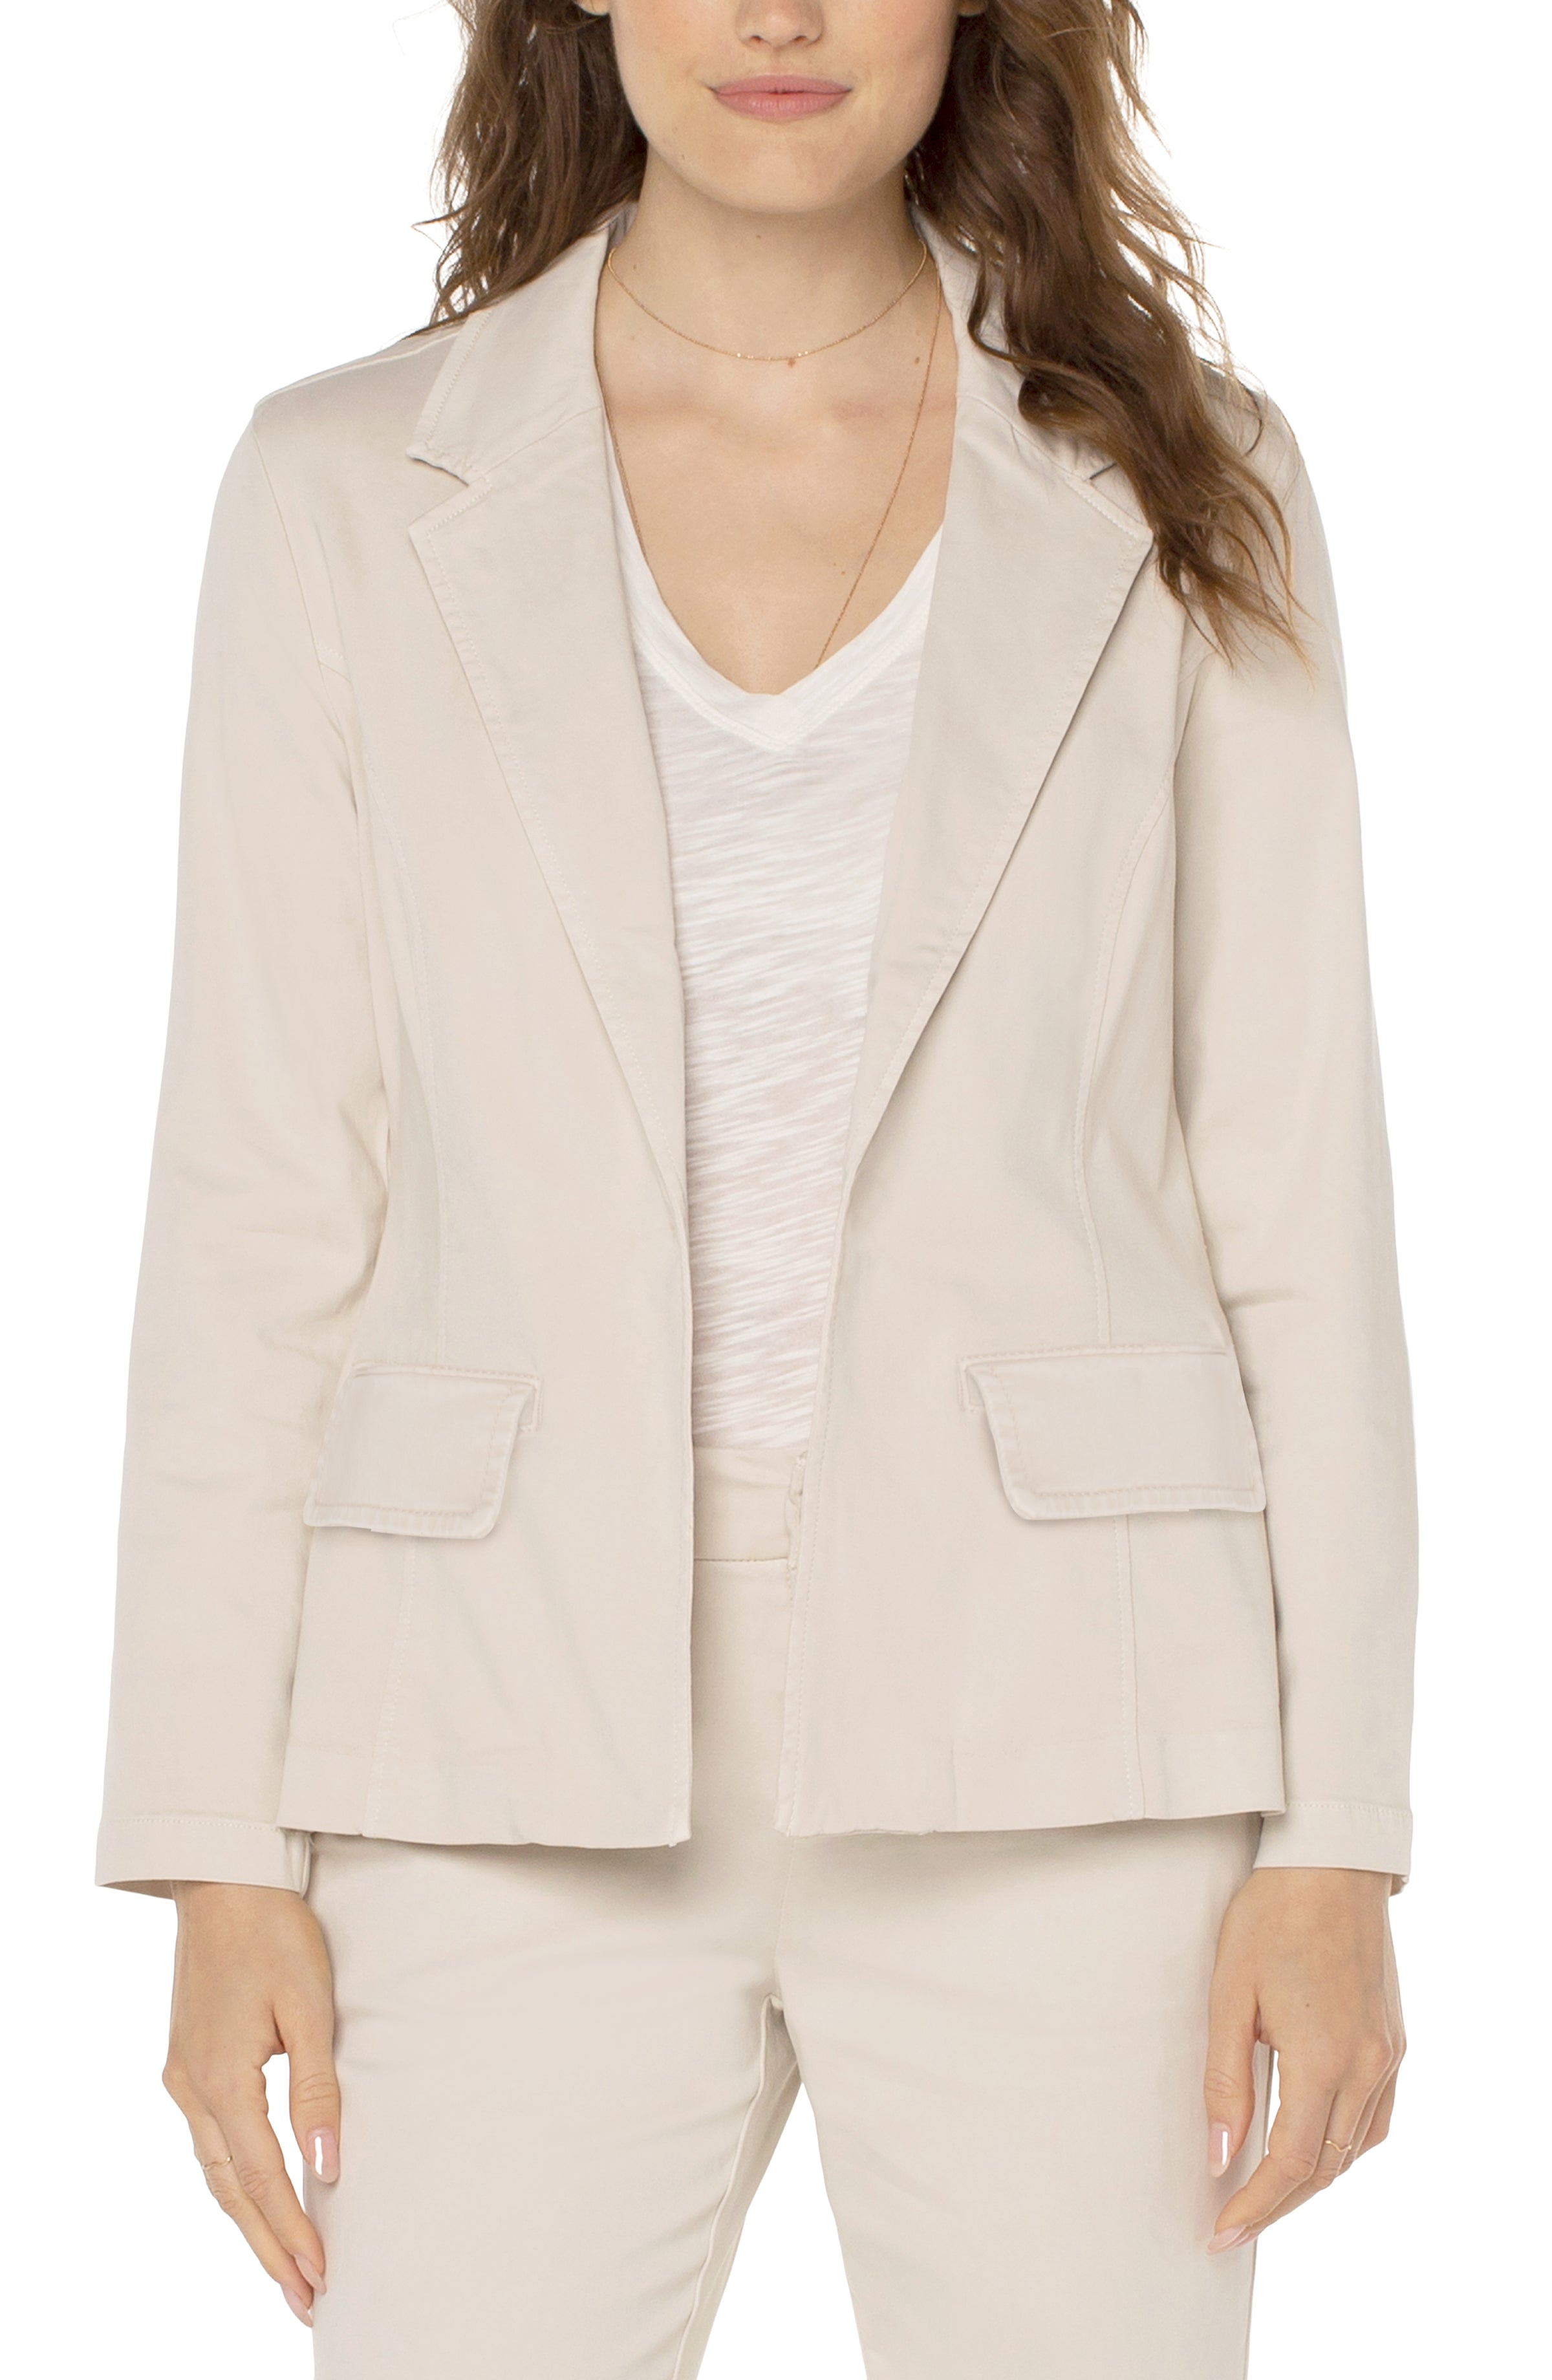 LVP Fitted Blazer - Roman Stone front View